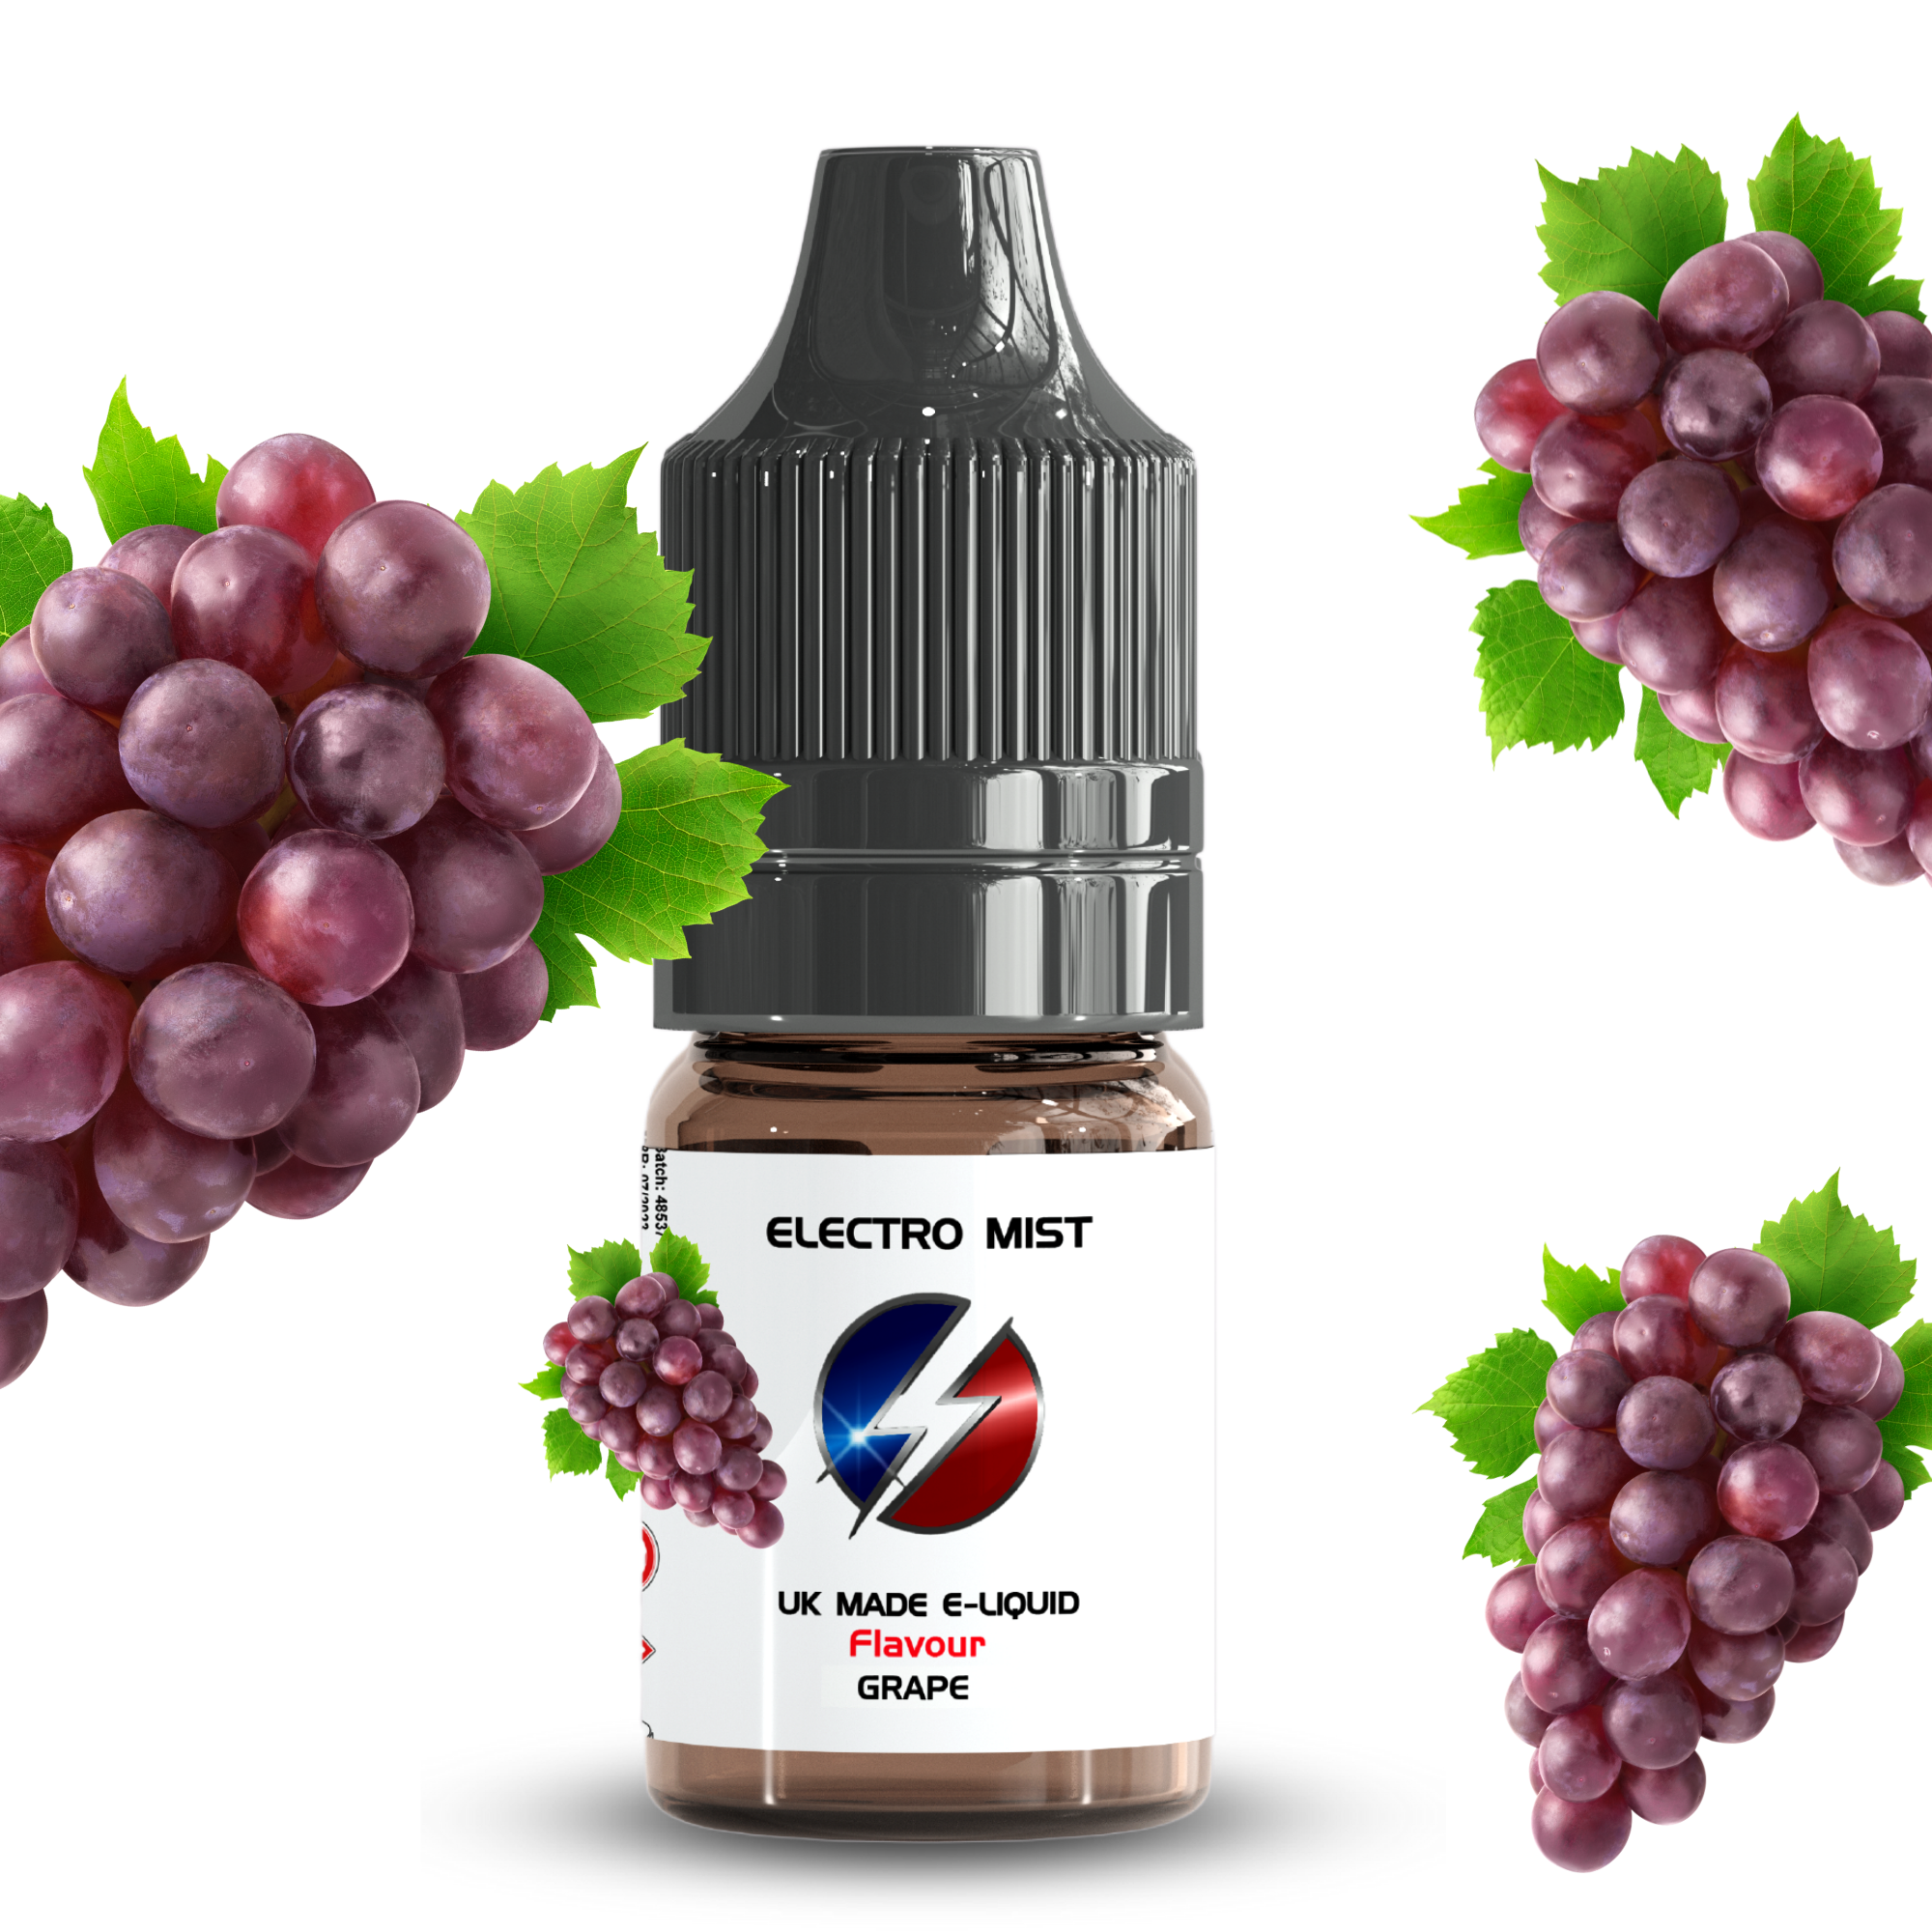 Electromist, the e-liquid brand you can trust. Get your taste buds ready for a flavour sensation, Grape. Nicotine Content: 3mg/6mg/12mg. Products may contain nicotine. For over 18s Only ejuice, vape pen, eliquid, e cigarette, 10ml, vaping, cloud, PG, VG, 60/40, vape liquid, Flavour